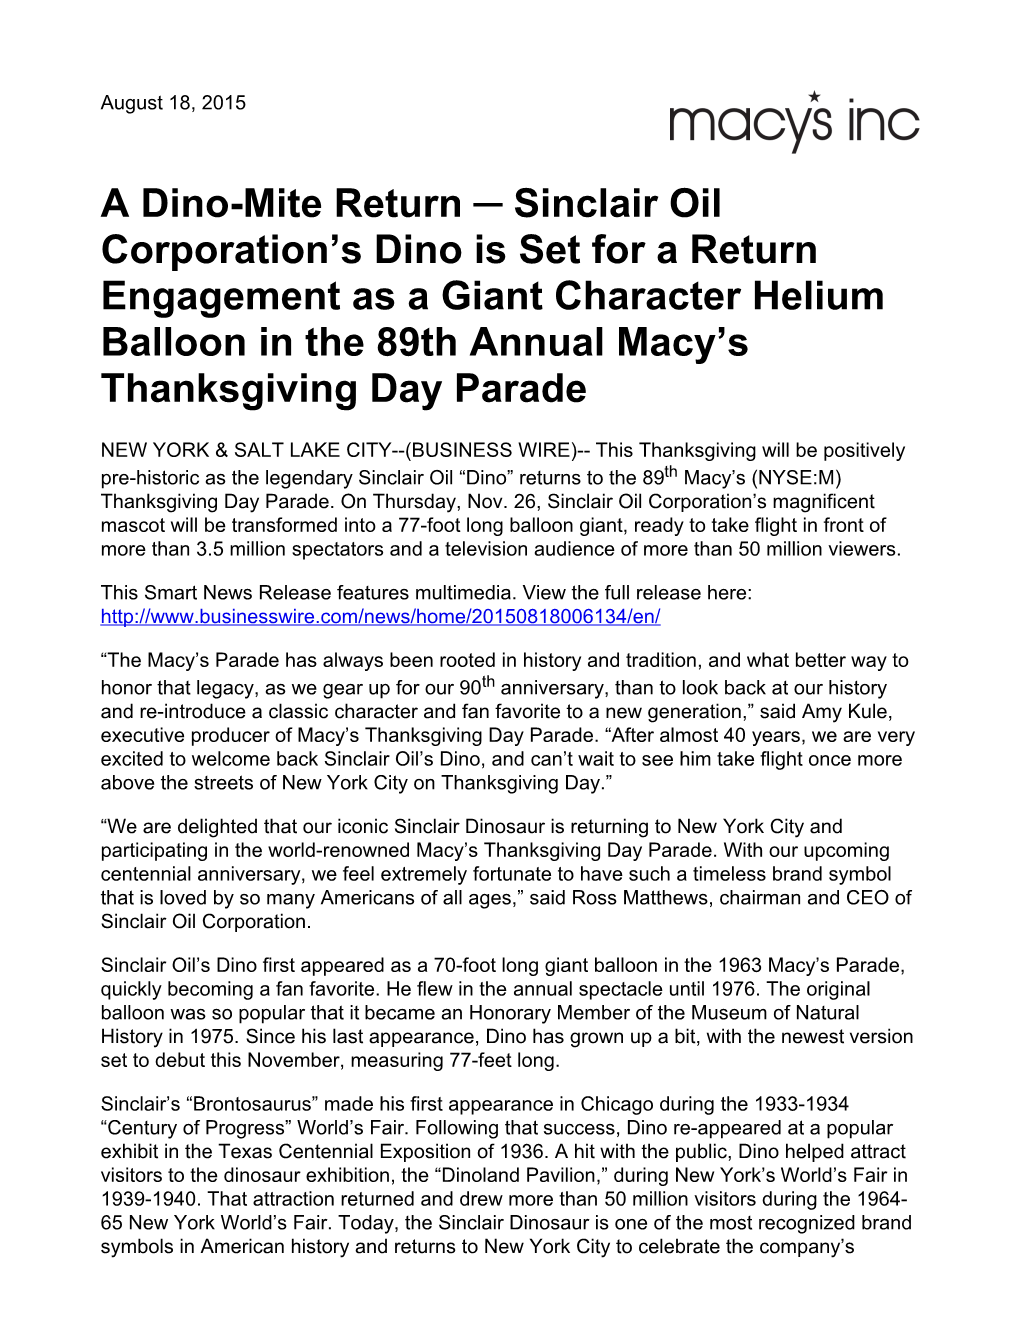 A Dino-Mite Return Sinclair Oil Corporation's Dino Is Set for a Return Engagement As a Giant Character Helium Balloon in T